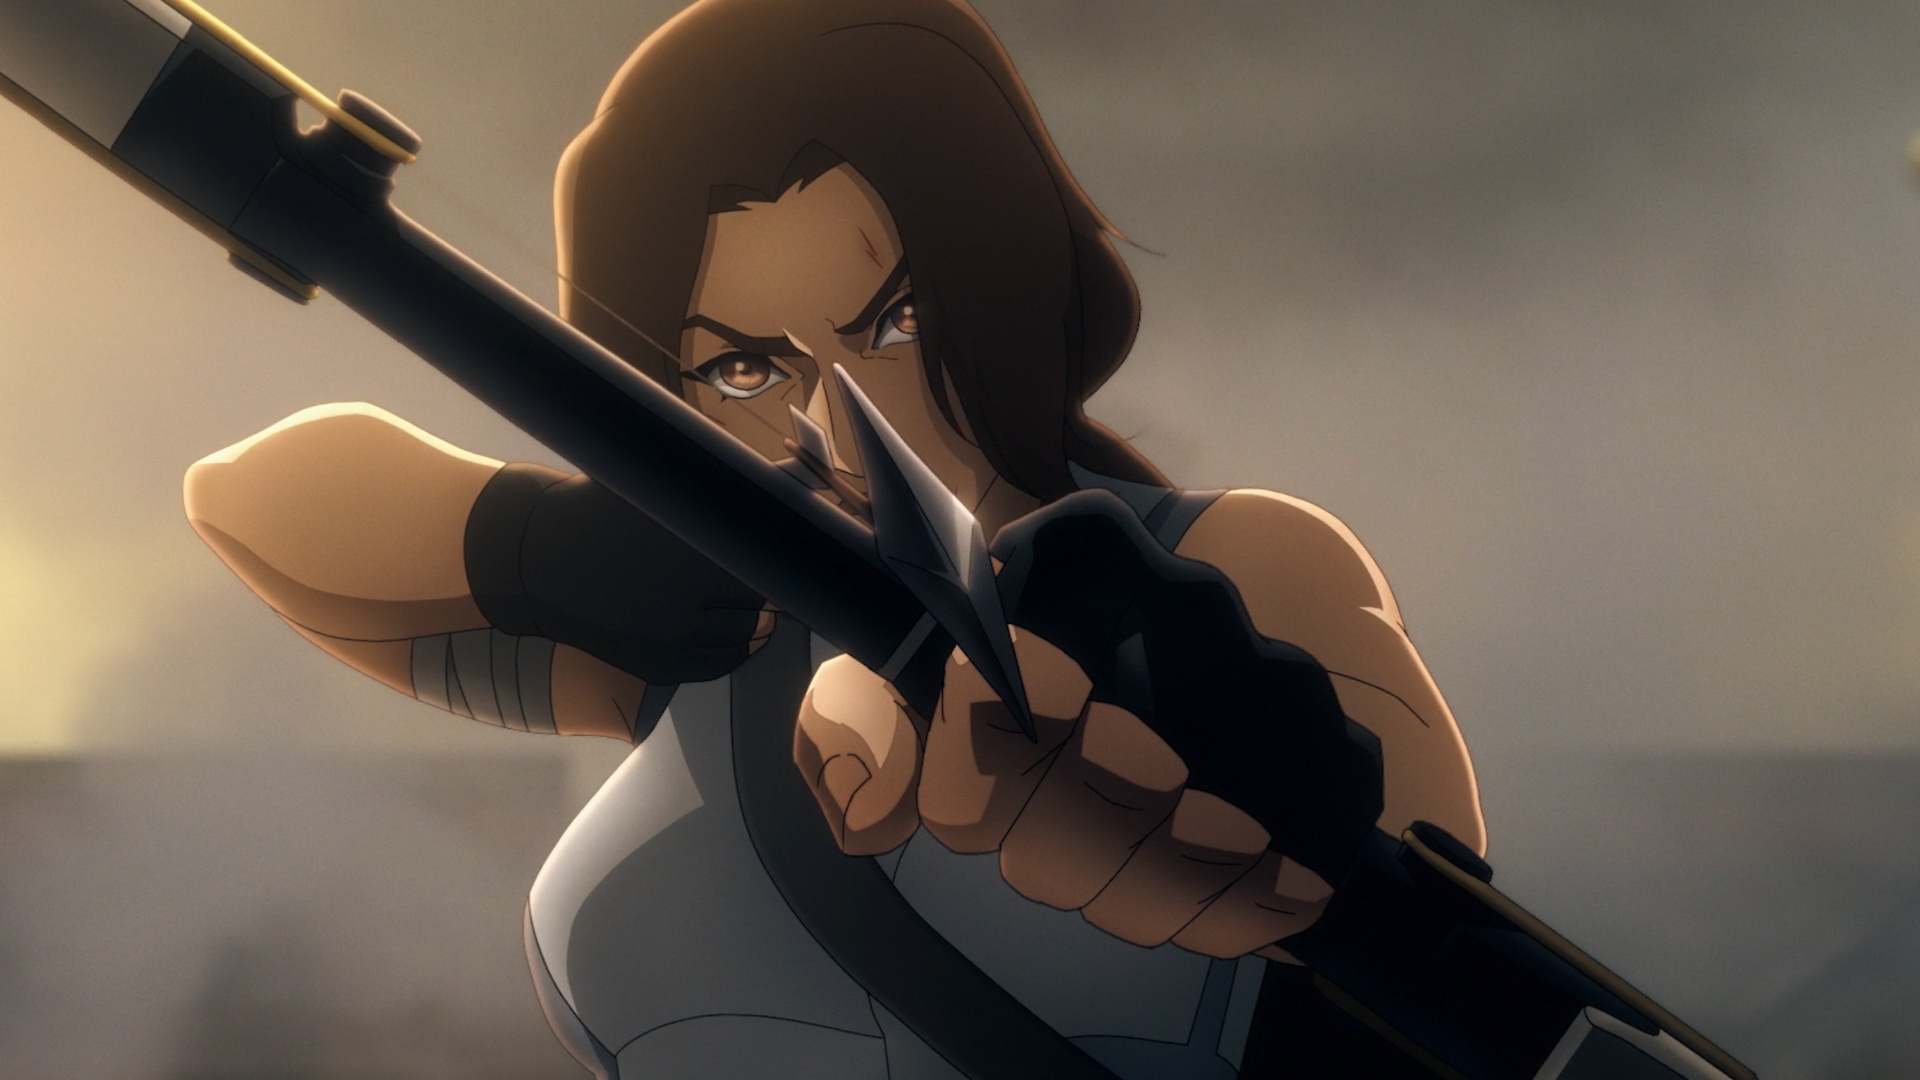  Netflix unveils first look at Hayley Atwell's Lara Croft in Tomb Raider anime 